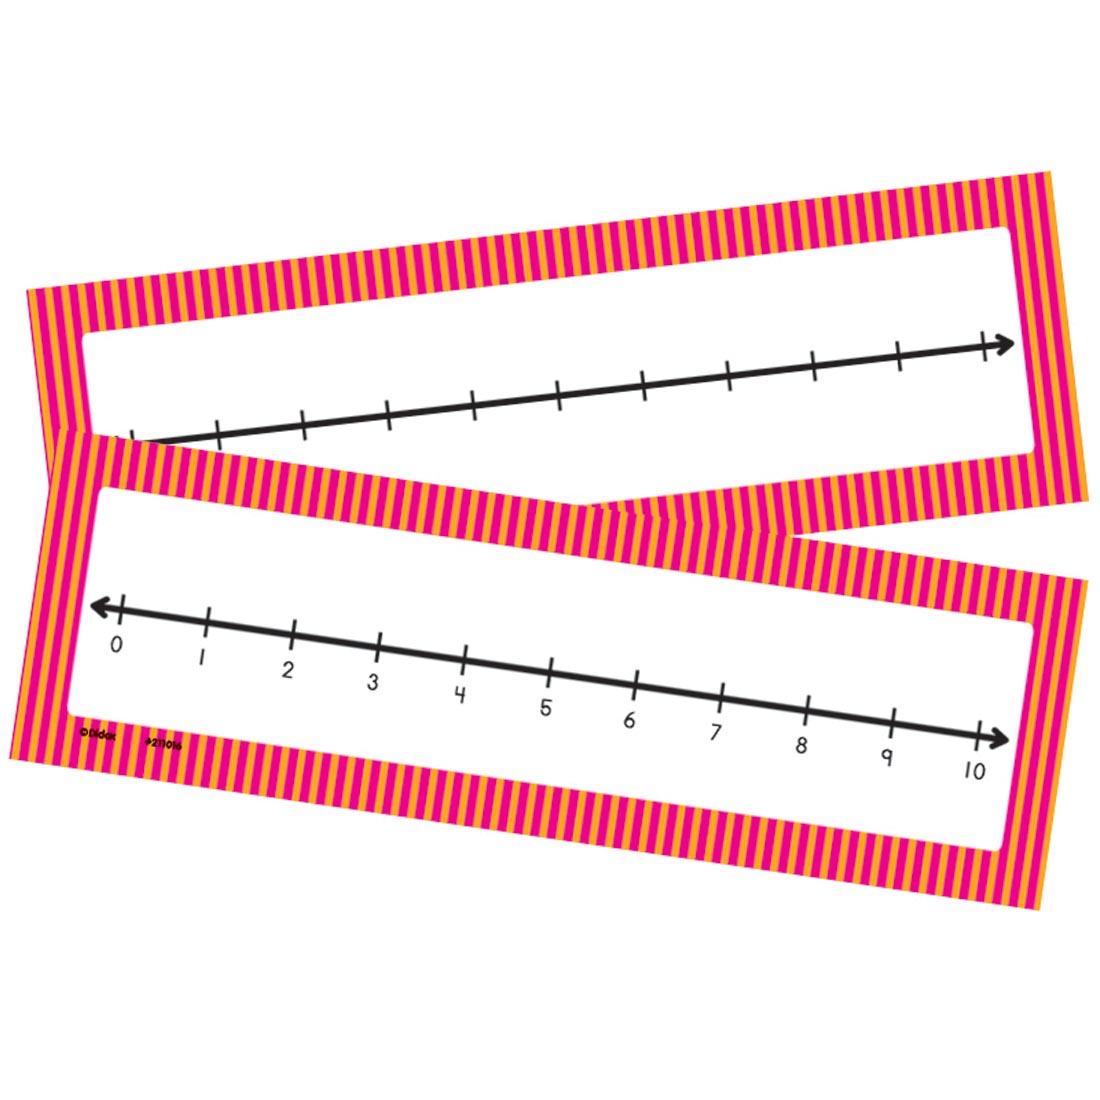 Front and Back Sides of 0-10 Student Number Line by Didax